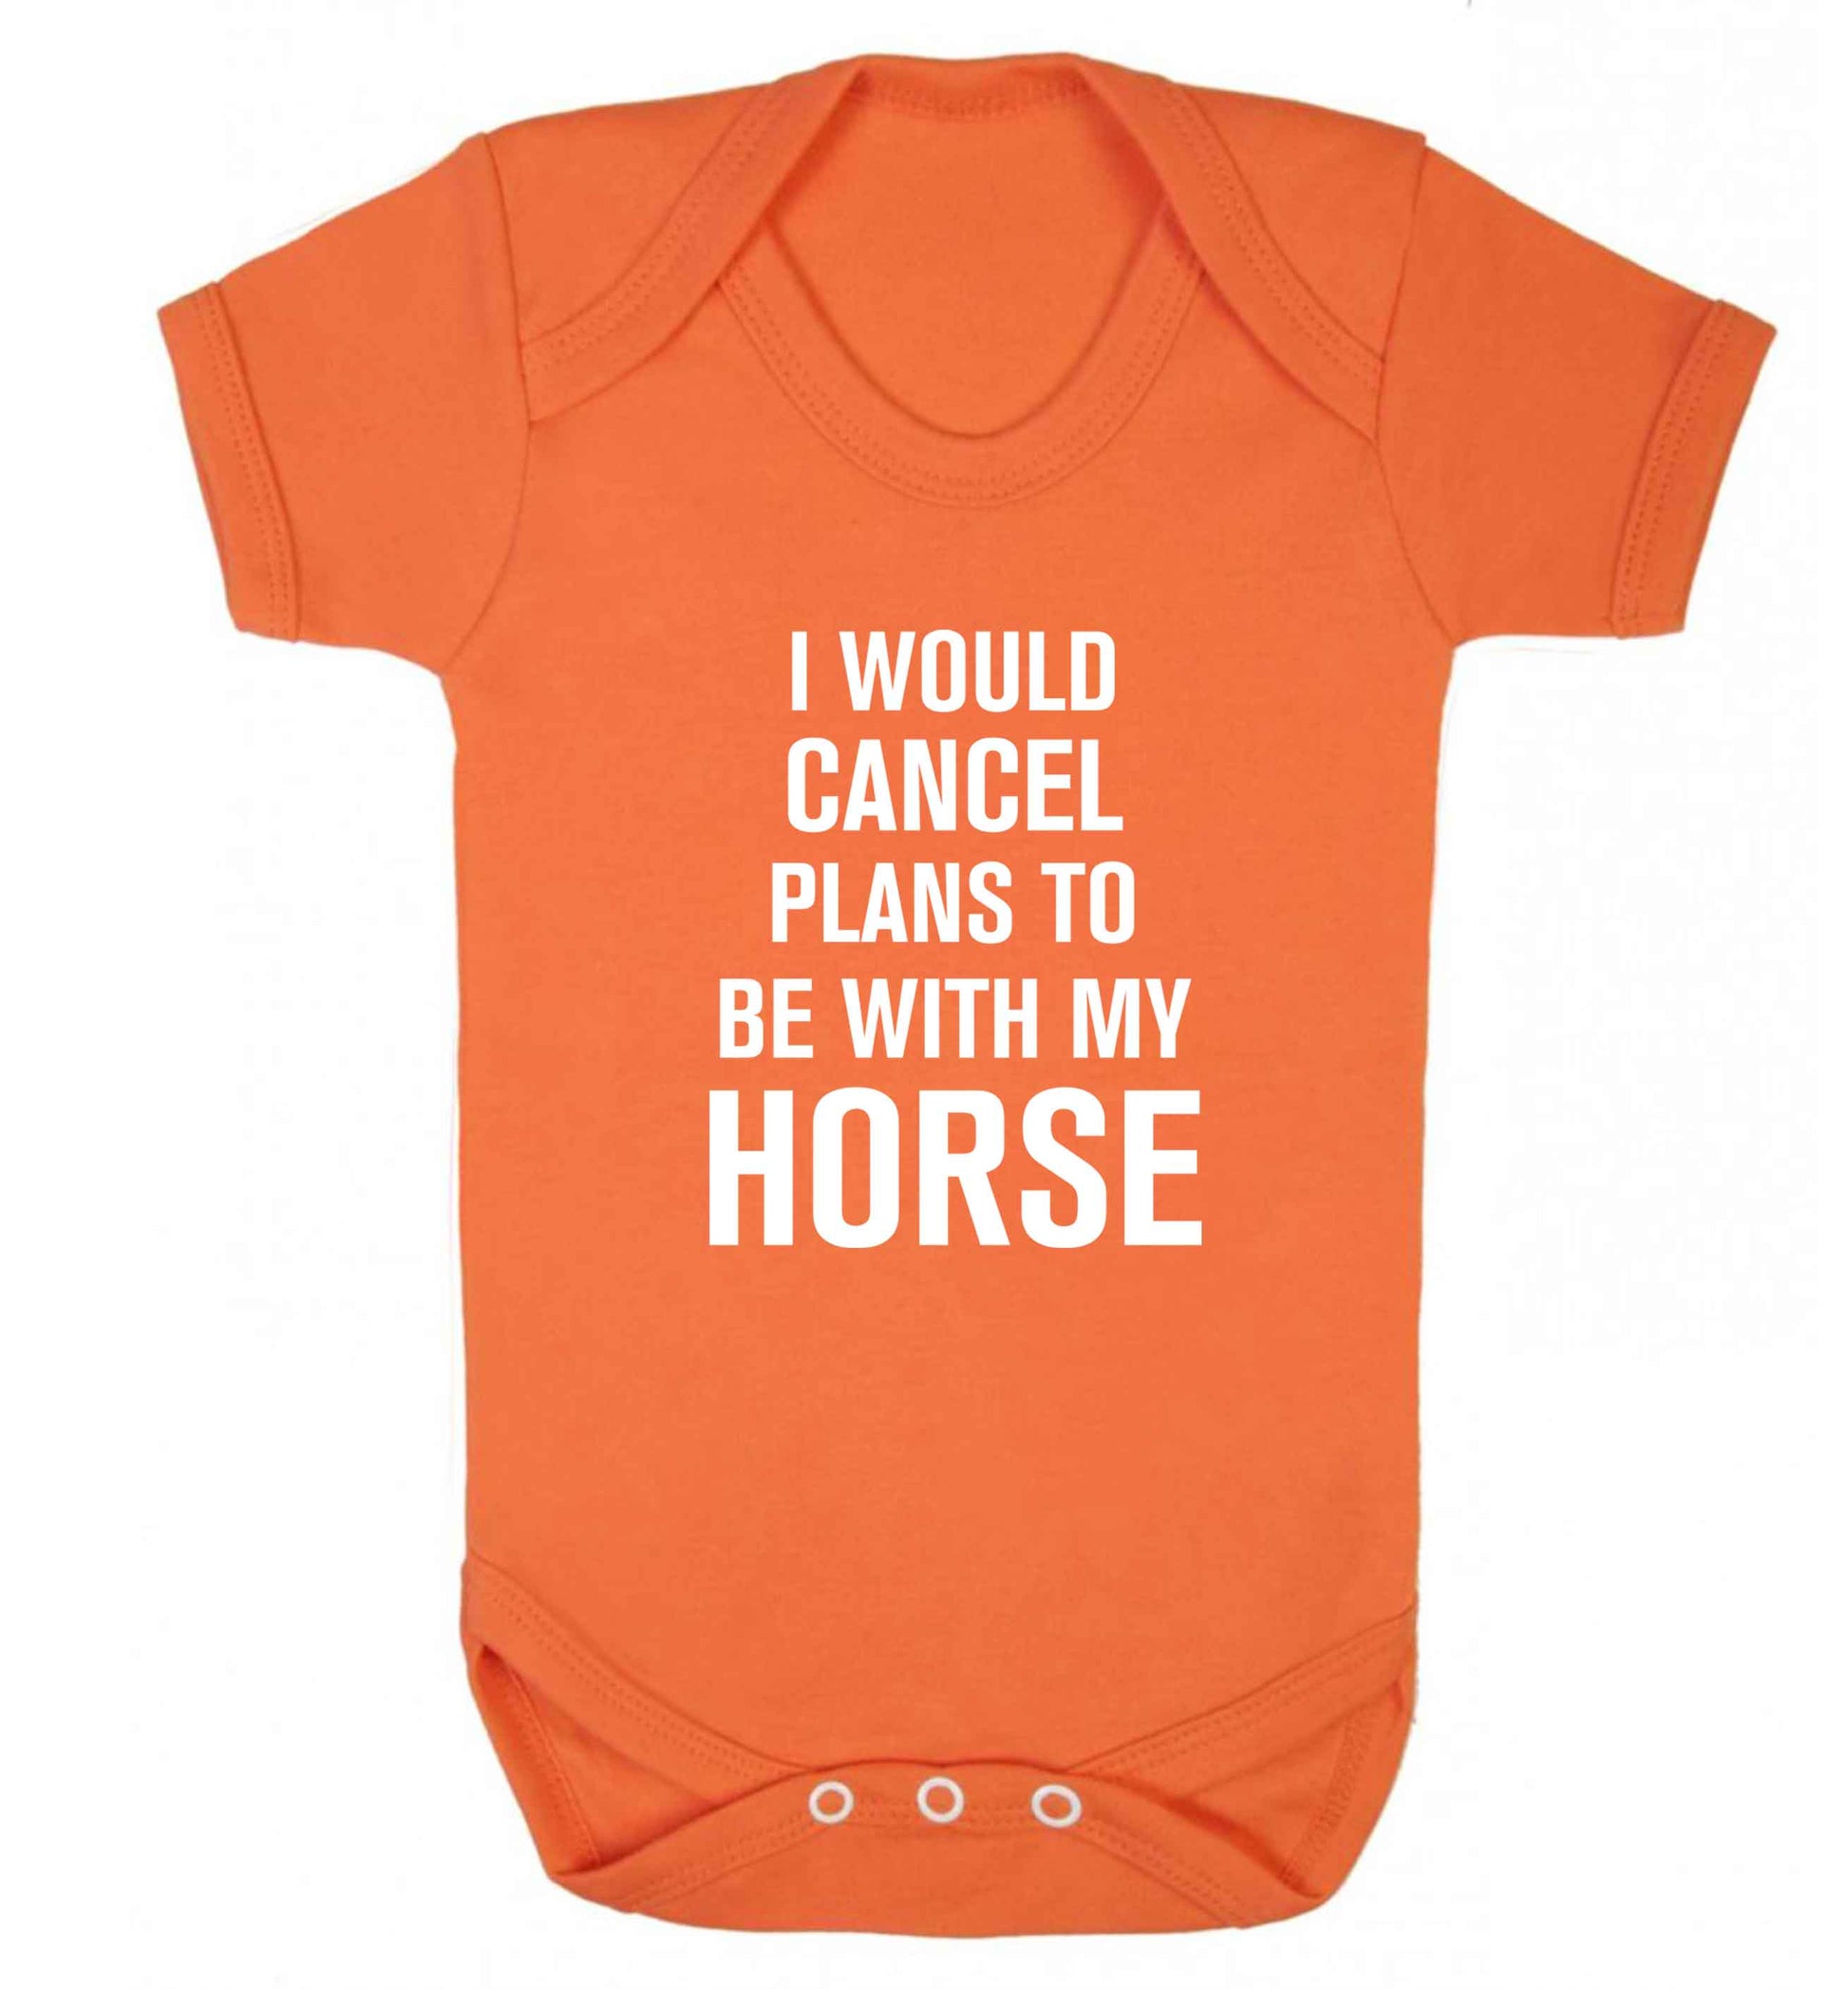 I will cancel plans to be with my horse baby vest orange 18-24 months